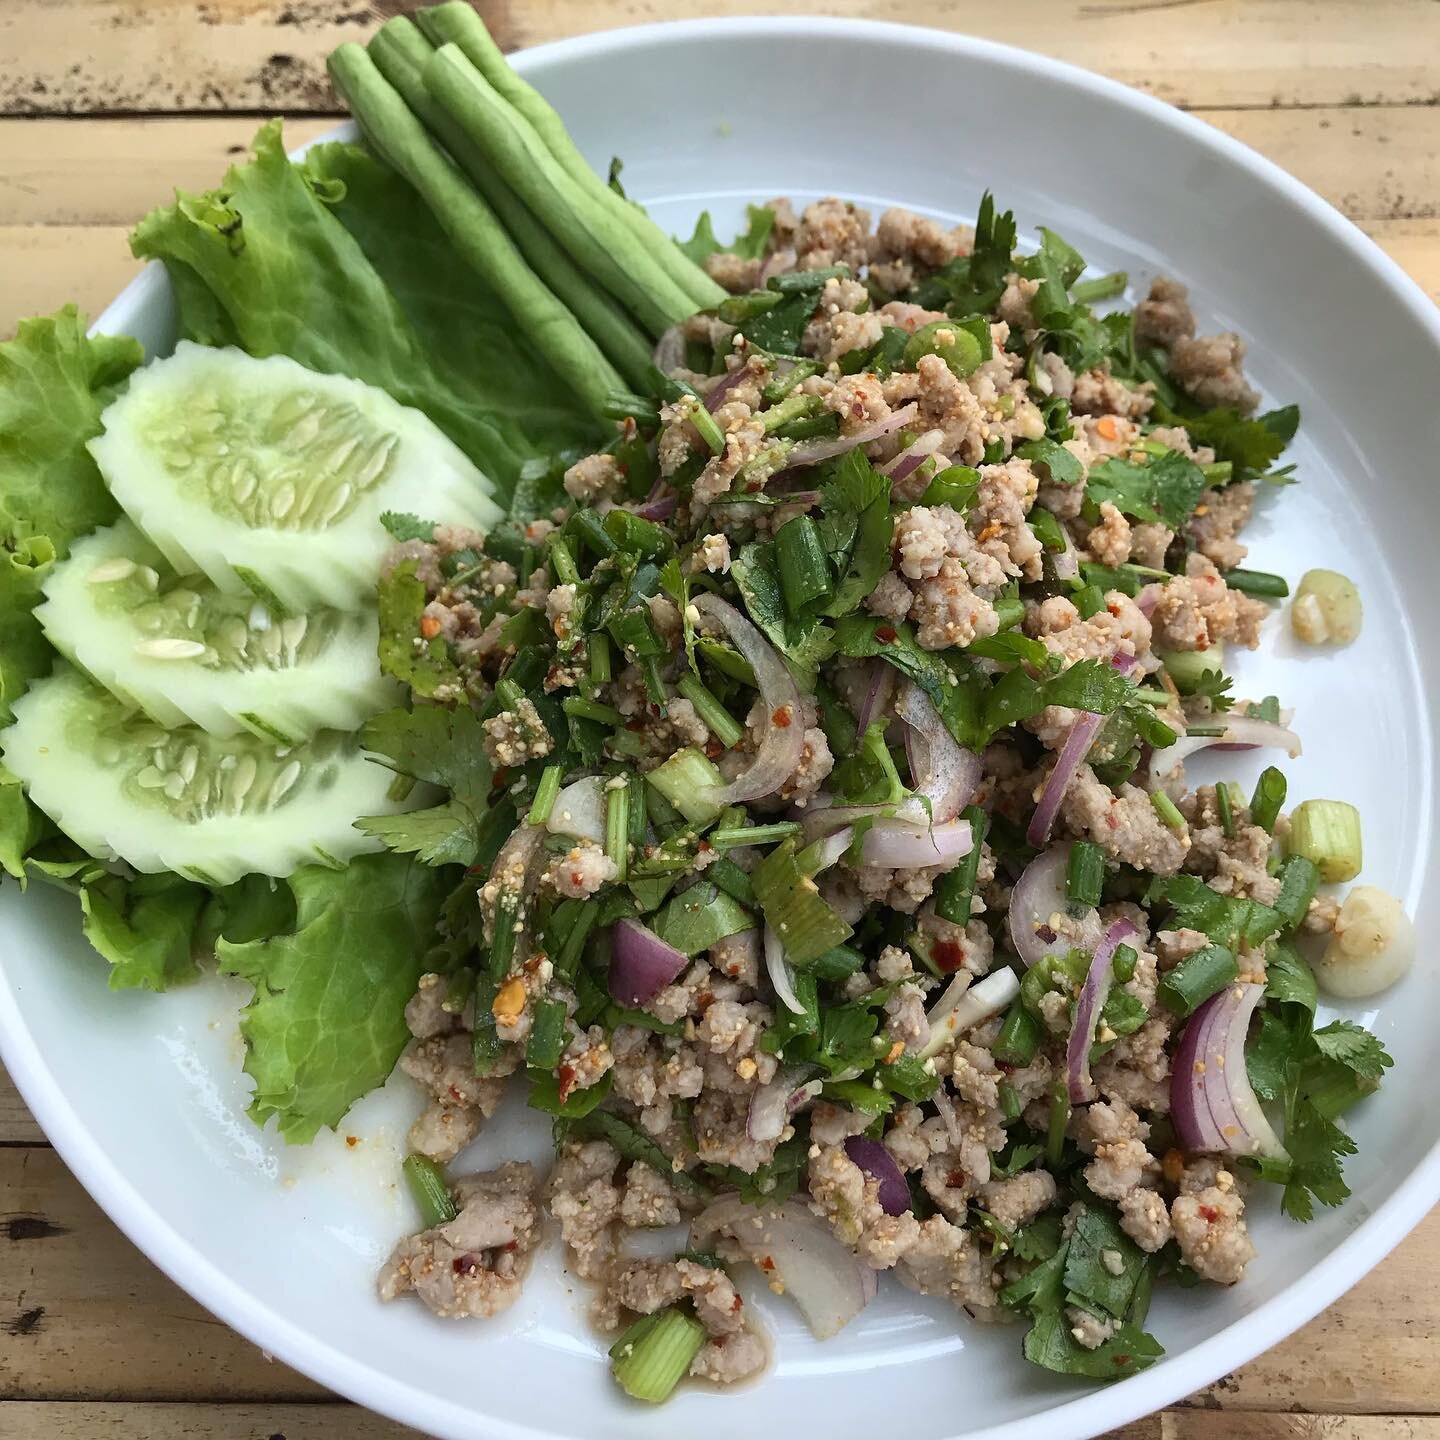 Dreaming about one of my favourite Thai dishes right now. Larb Moo, or minced pork salad, full of fragrant herbs, lime juice, fish sauce and crunchy toasted rice powder. 😋
.
.
.
.
.
.
#thaifoodstagram #larbmoo #ilovethaifood #choengmonbeach #baanchu